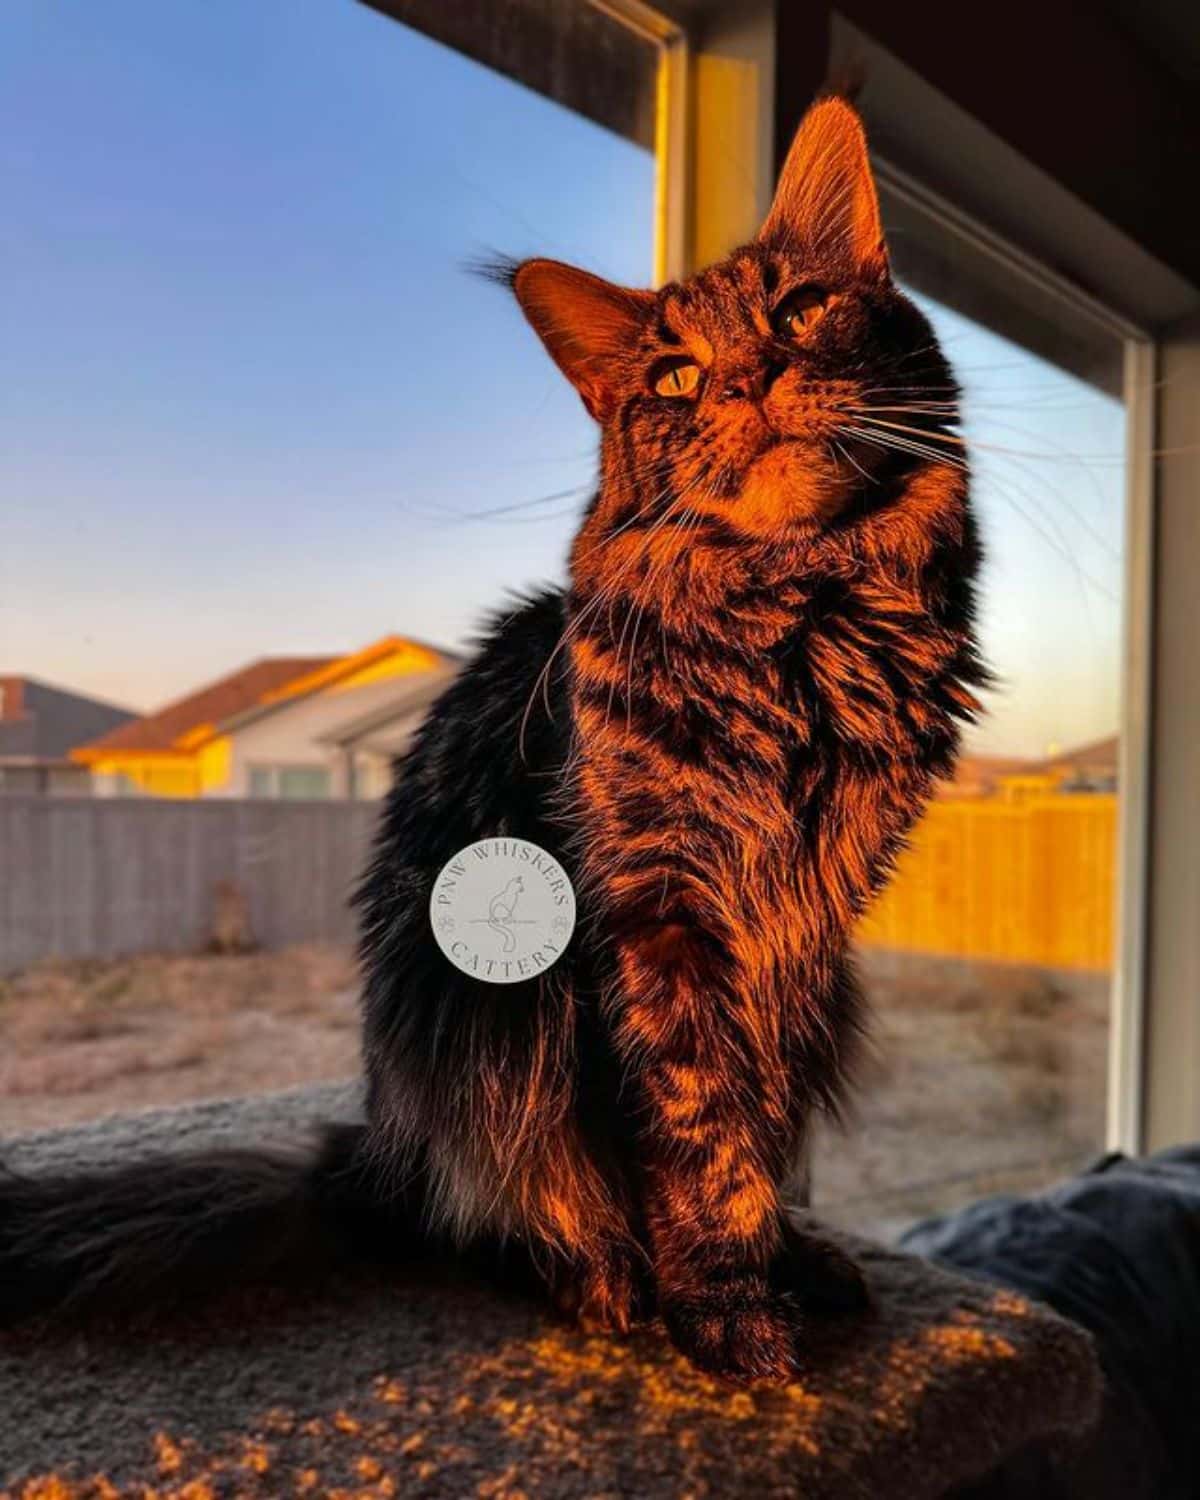 A tabby maine coon sitting on a concrete slab during the sunset.